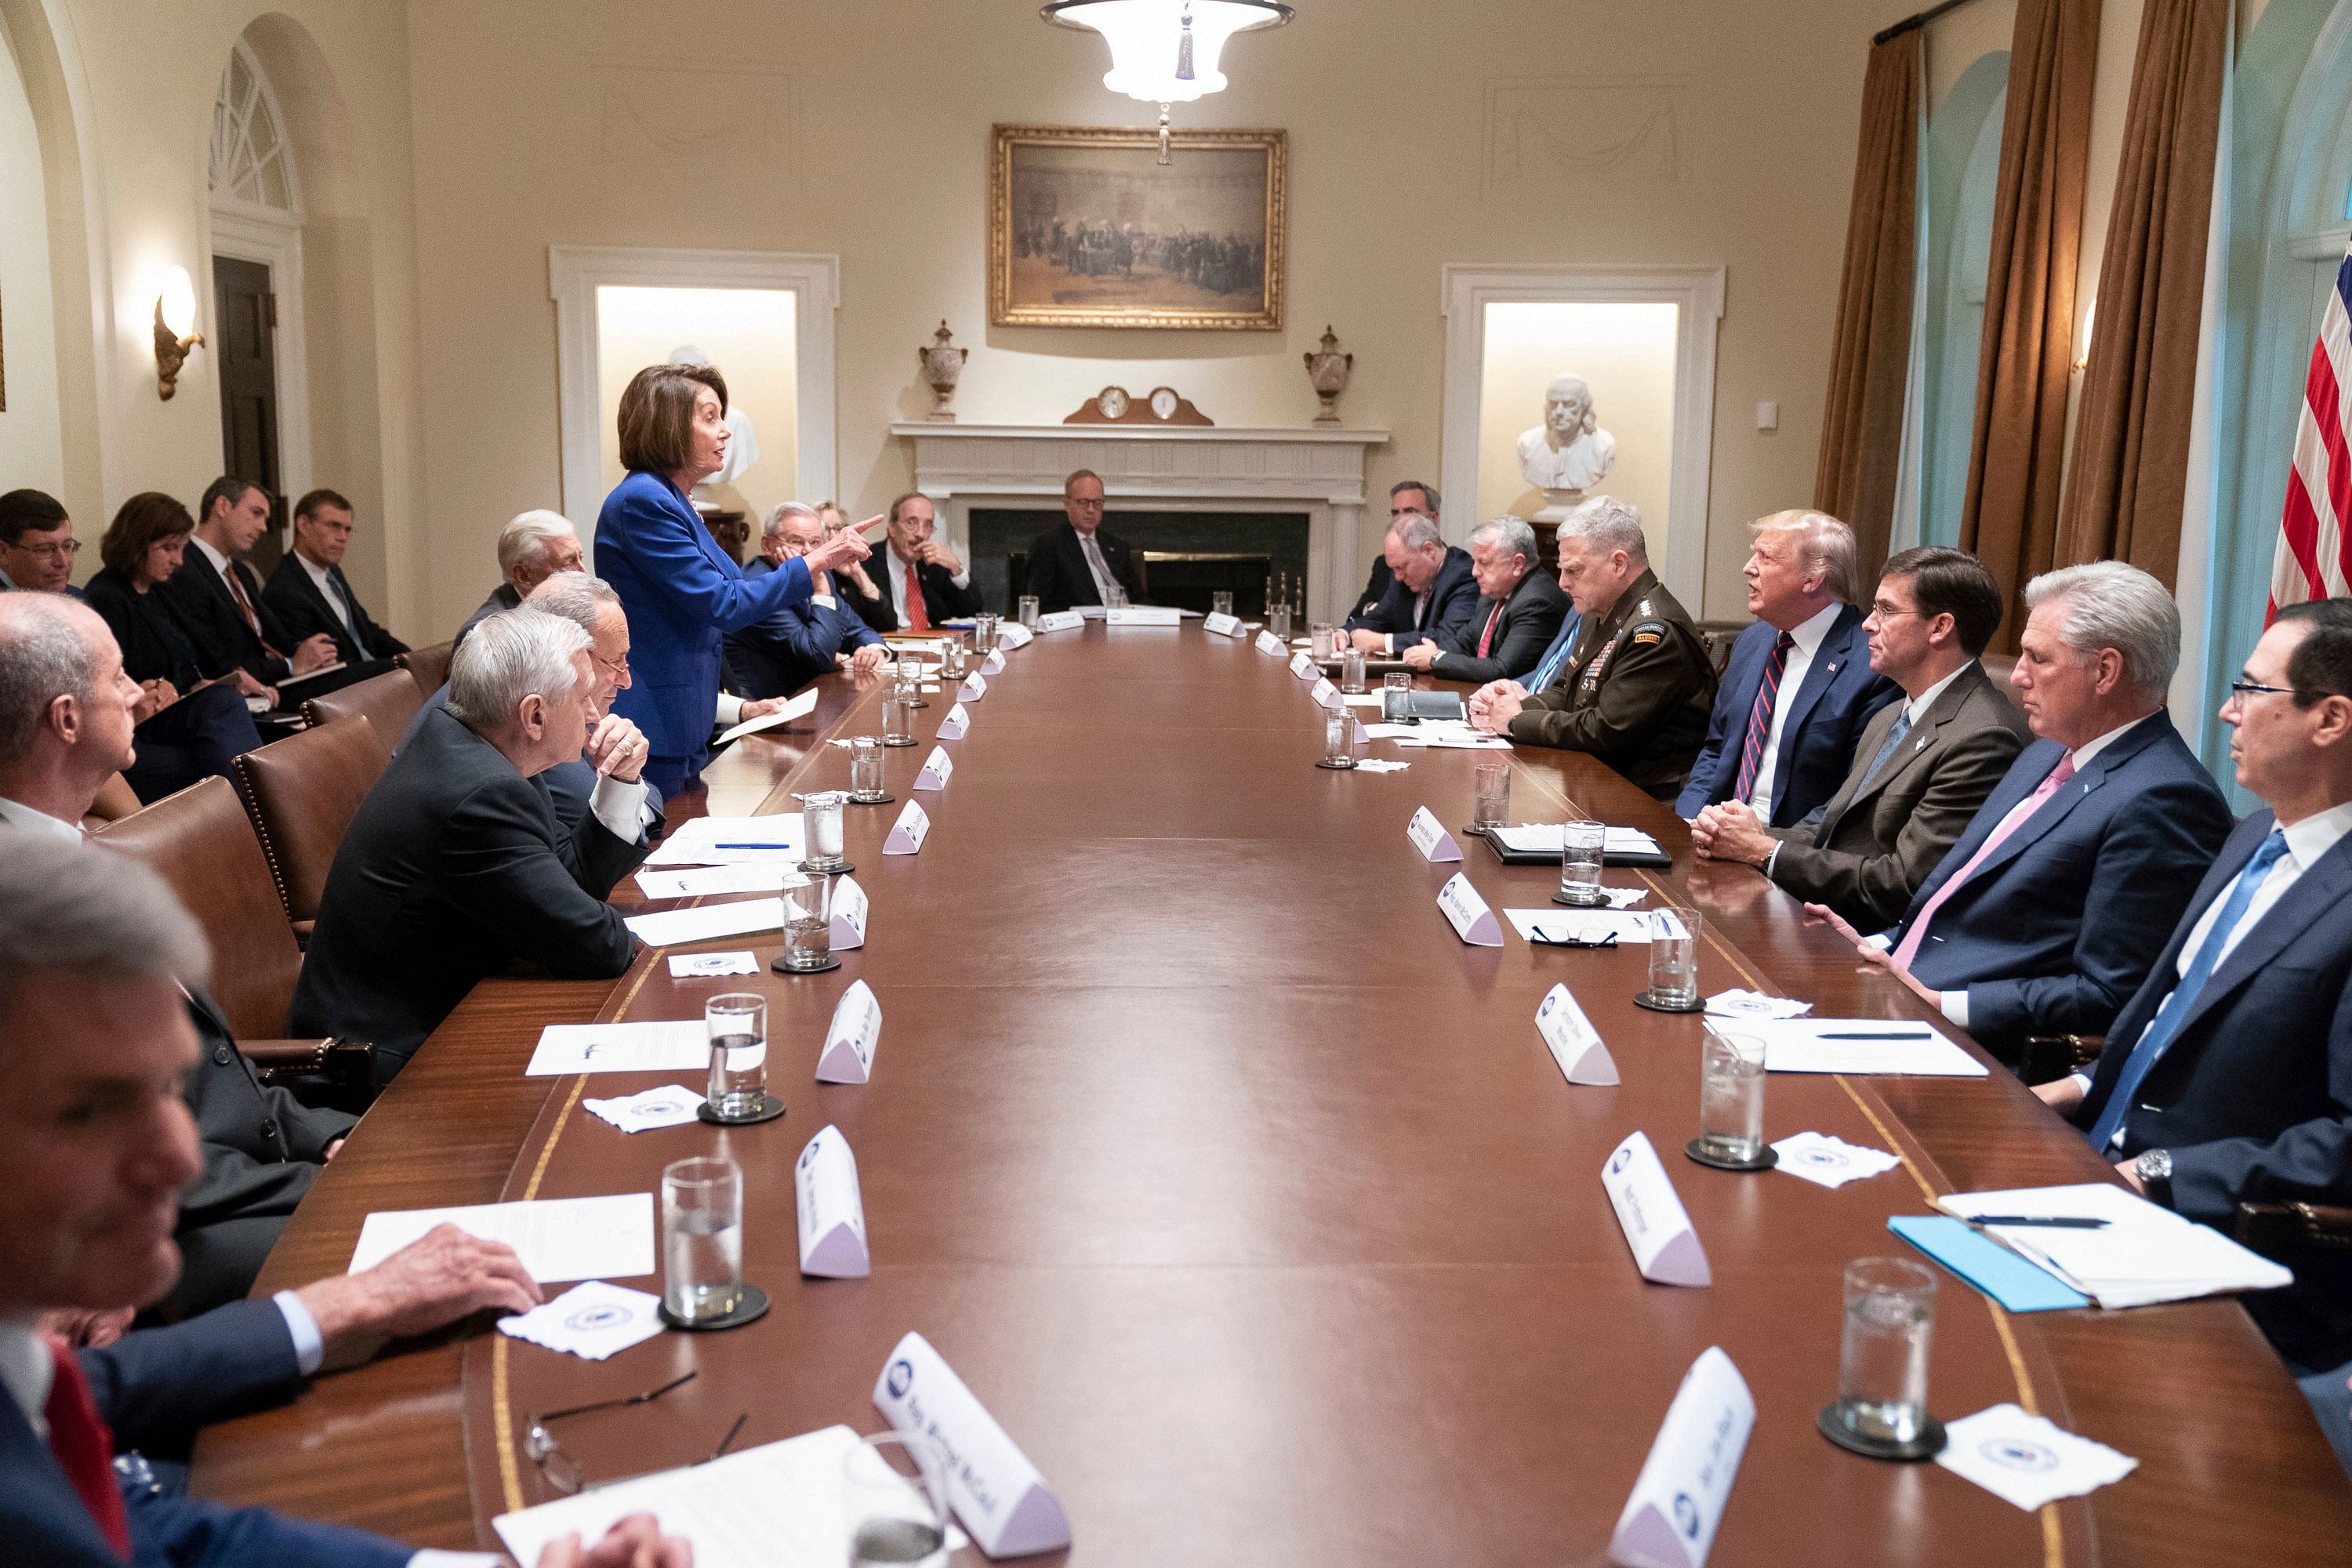 White House, President Donald Trump, center right, meets with House Speaker Nancy Pelosi, standing left, Congressional leadership and others, Wednesday, Oct. 16, 2019, in the Cabinet Room of the White House in Washington. (AP Photo)